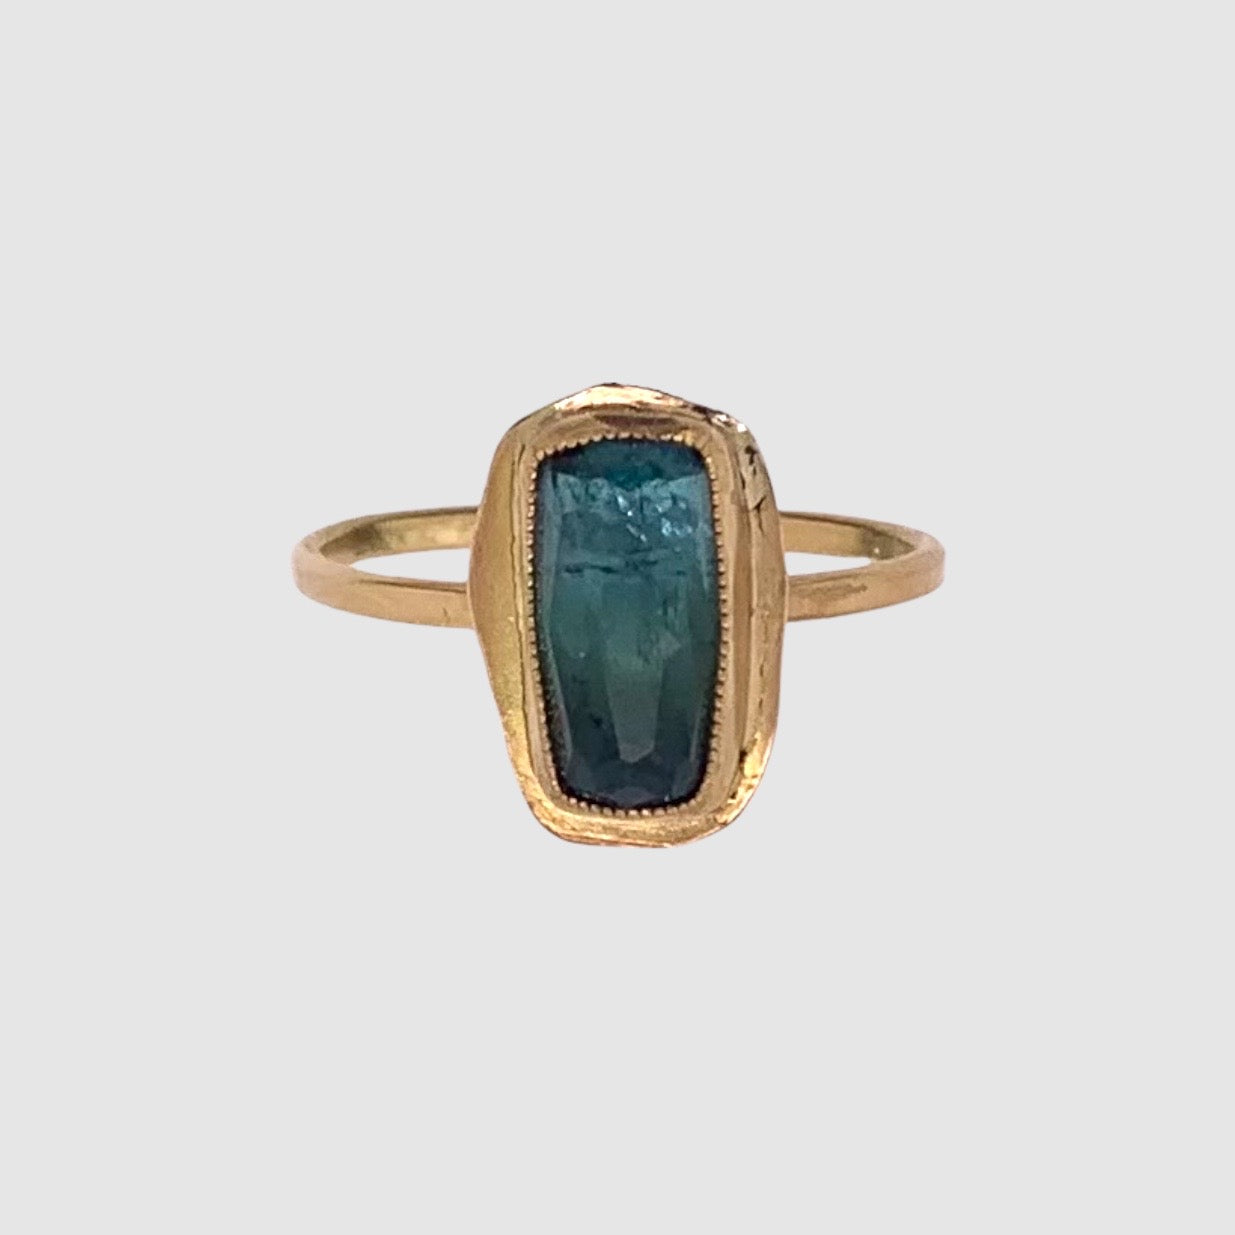 HEIRLOOM RING // SIMPLE // GOLD // TEAL TOURMALINE